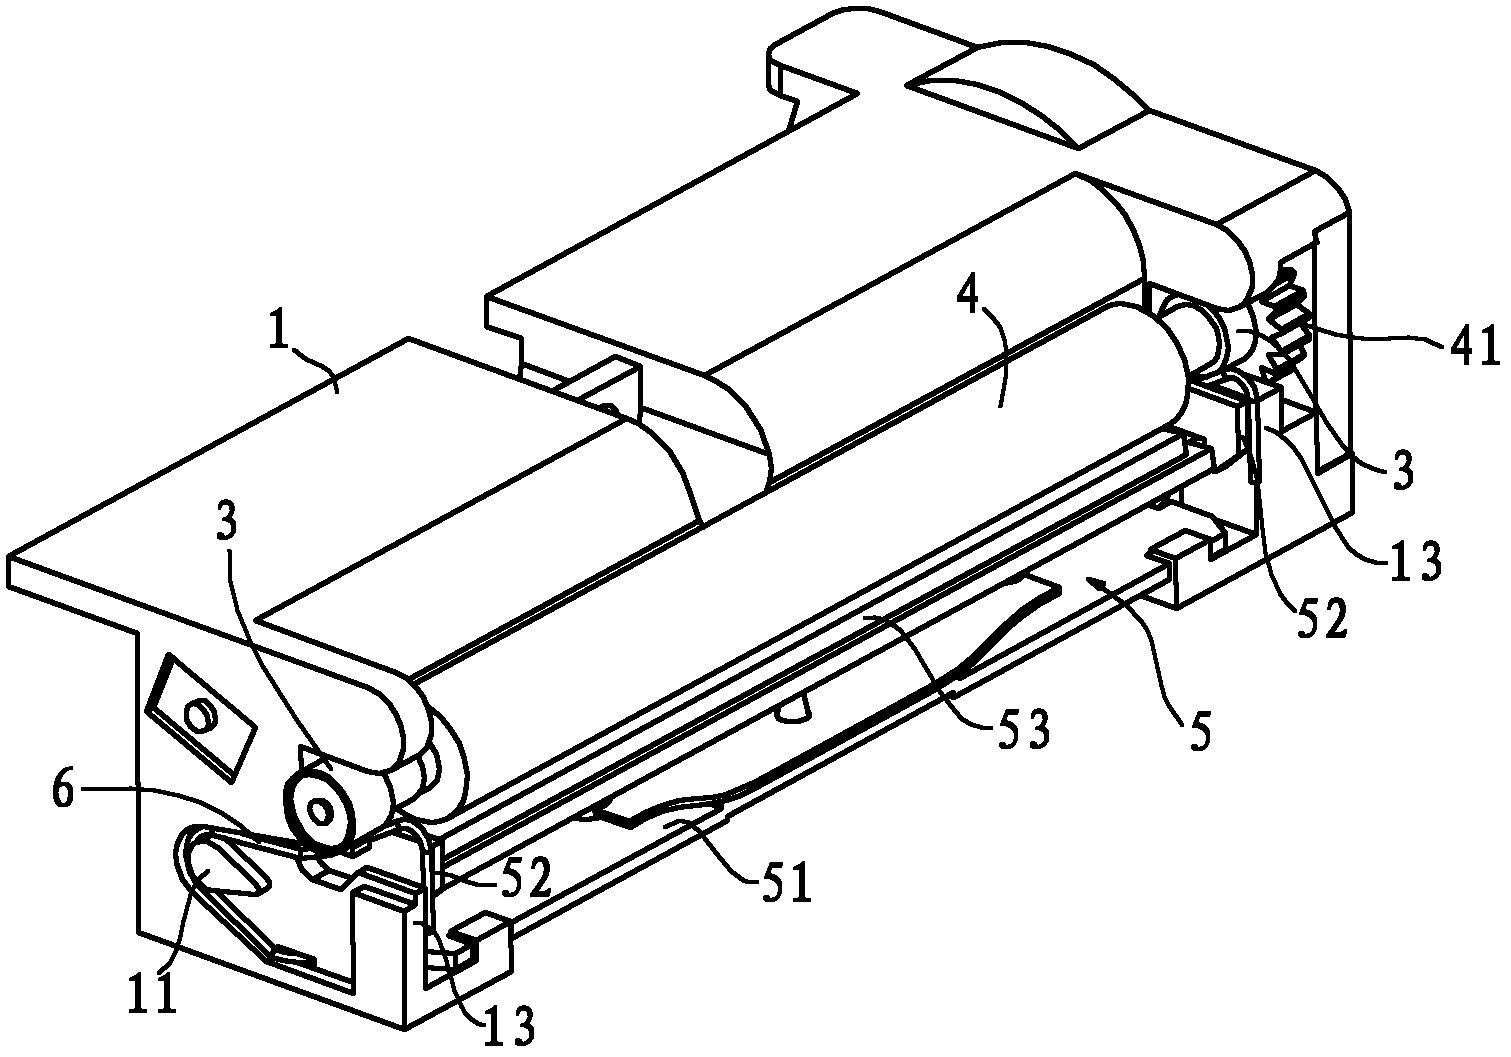 Assembly structure for rack and rubber roll as well as thermal printer applying assembly structure